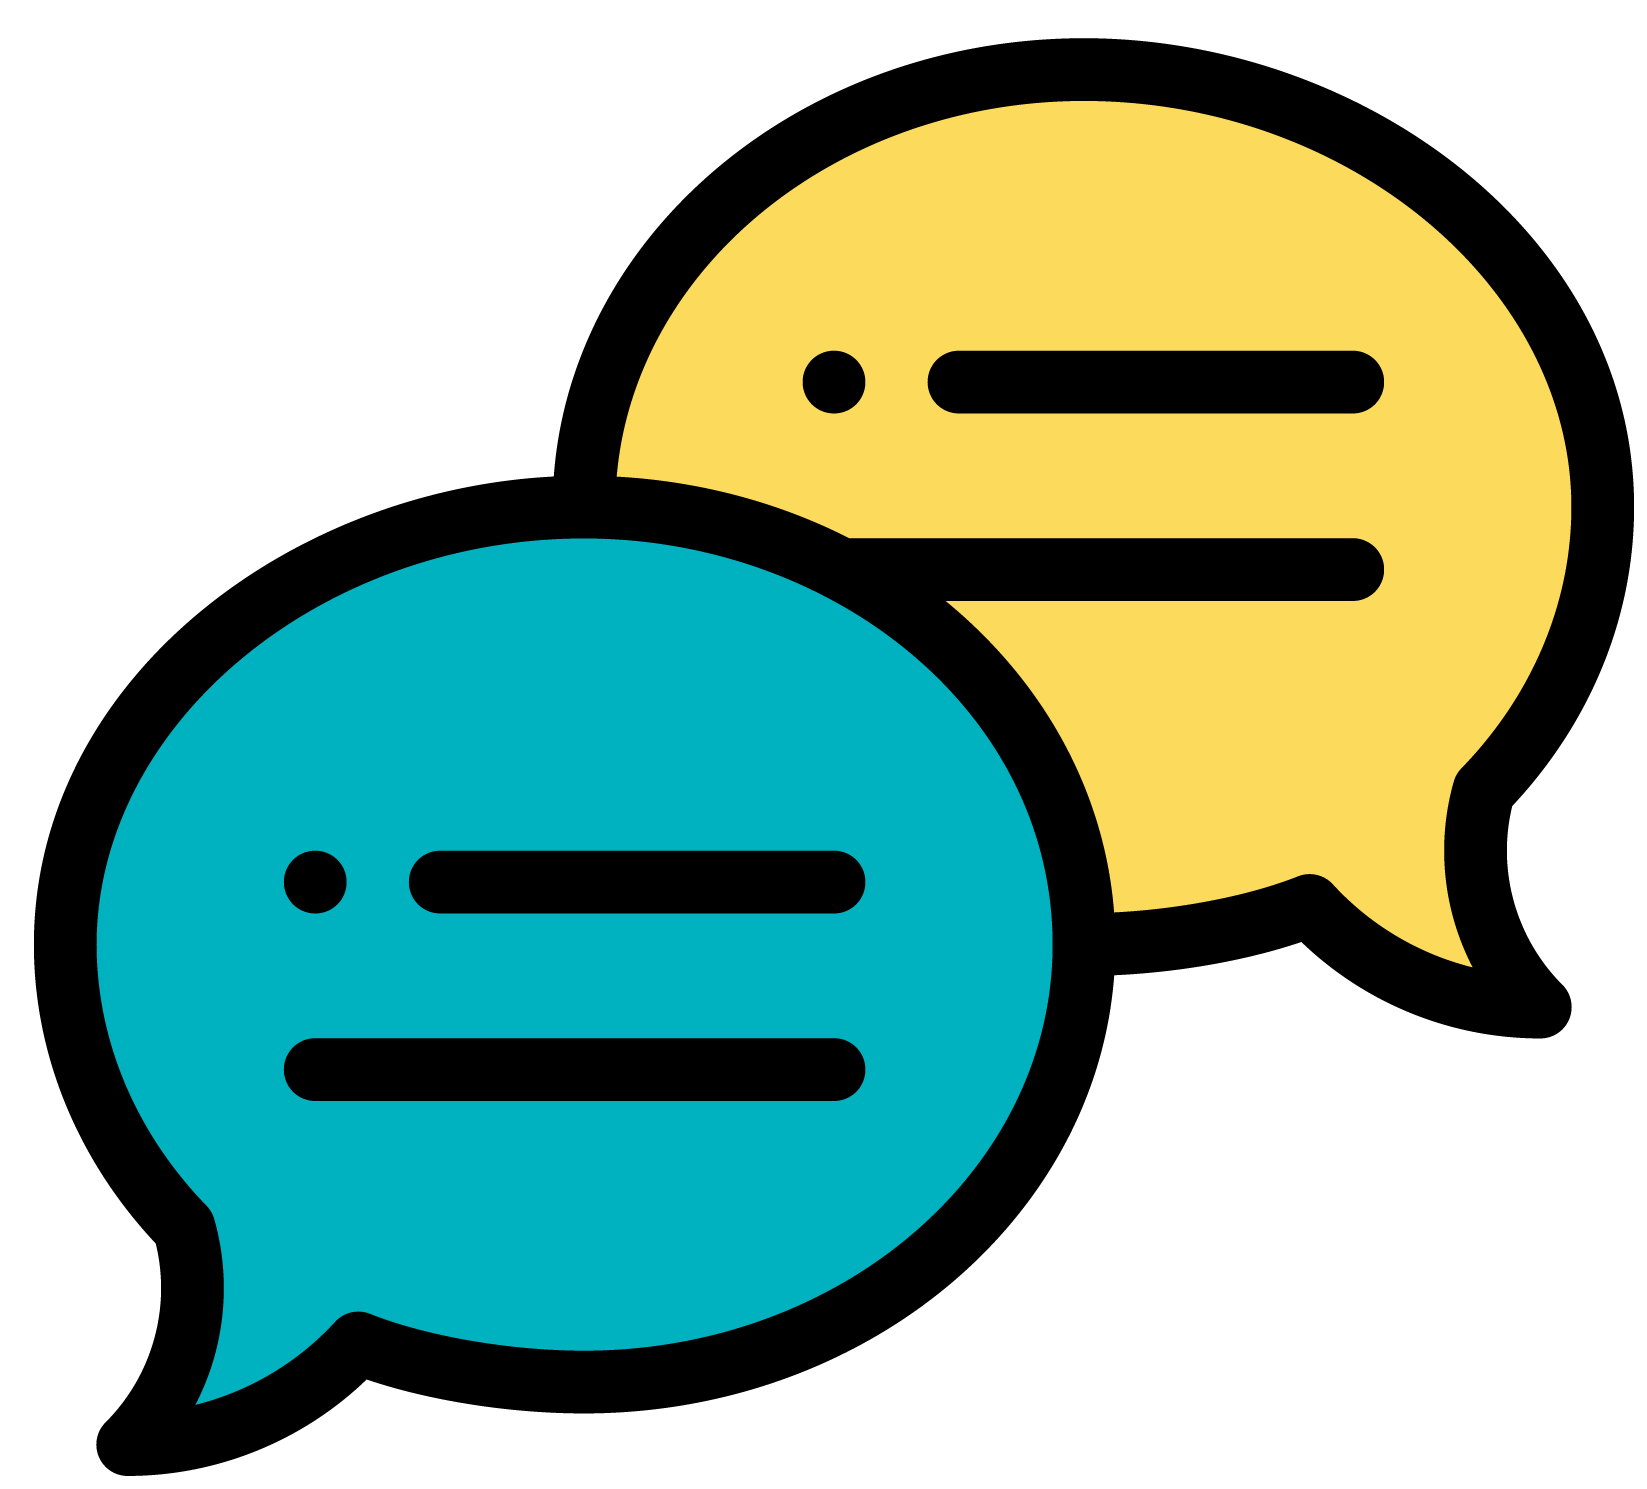 icon of two chat bubbles